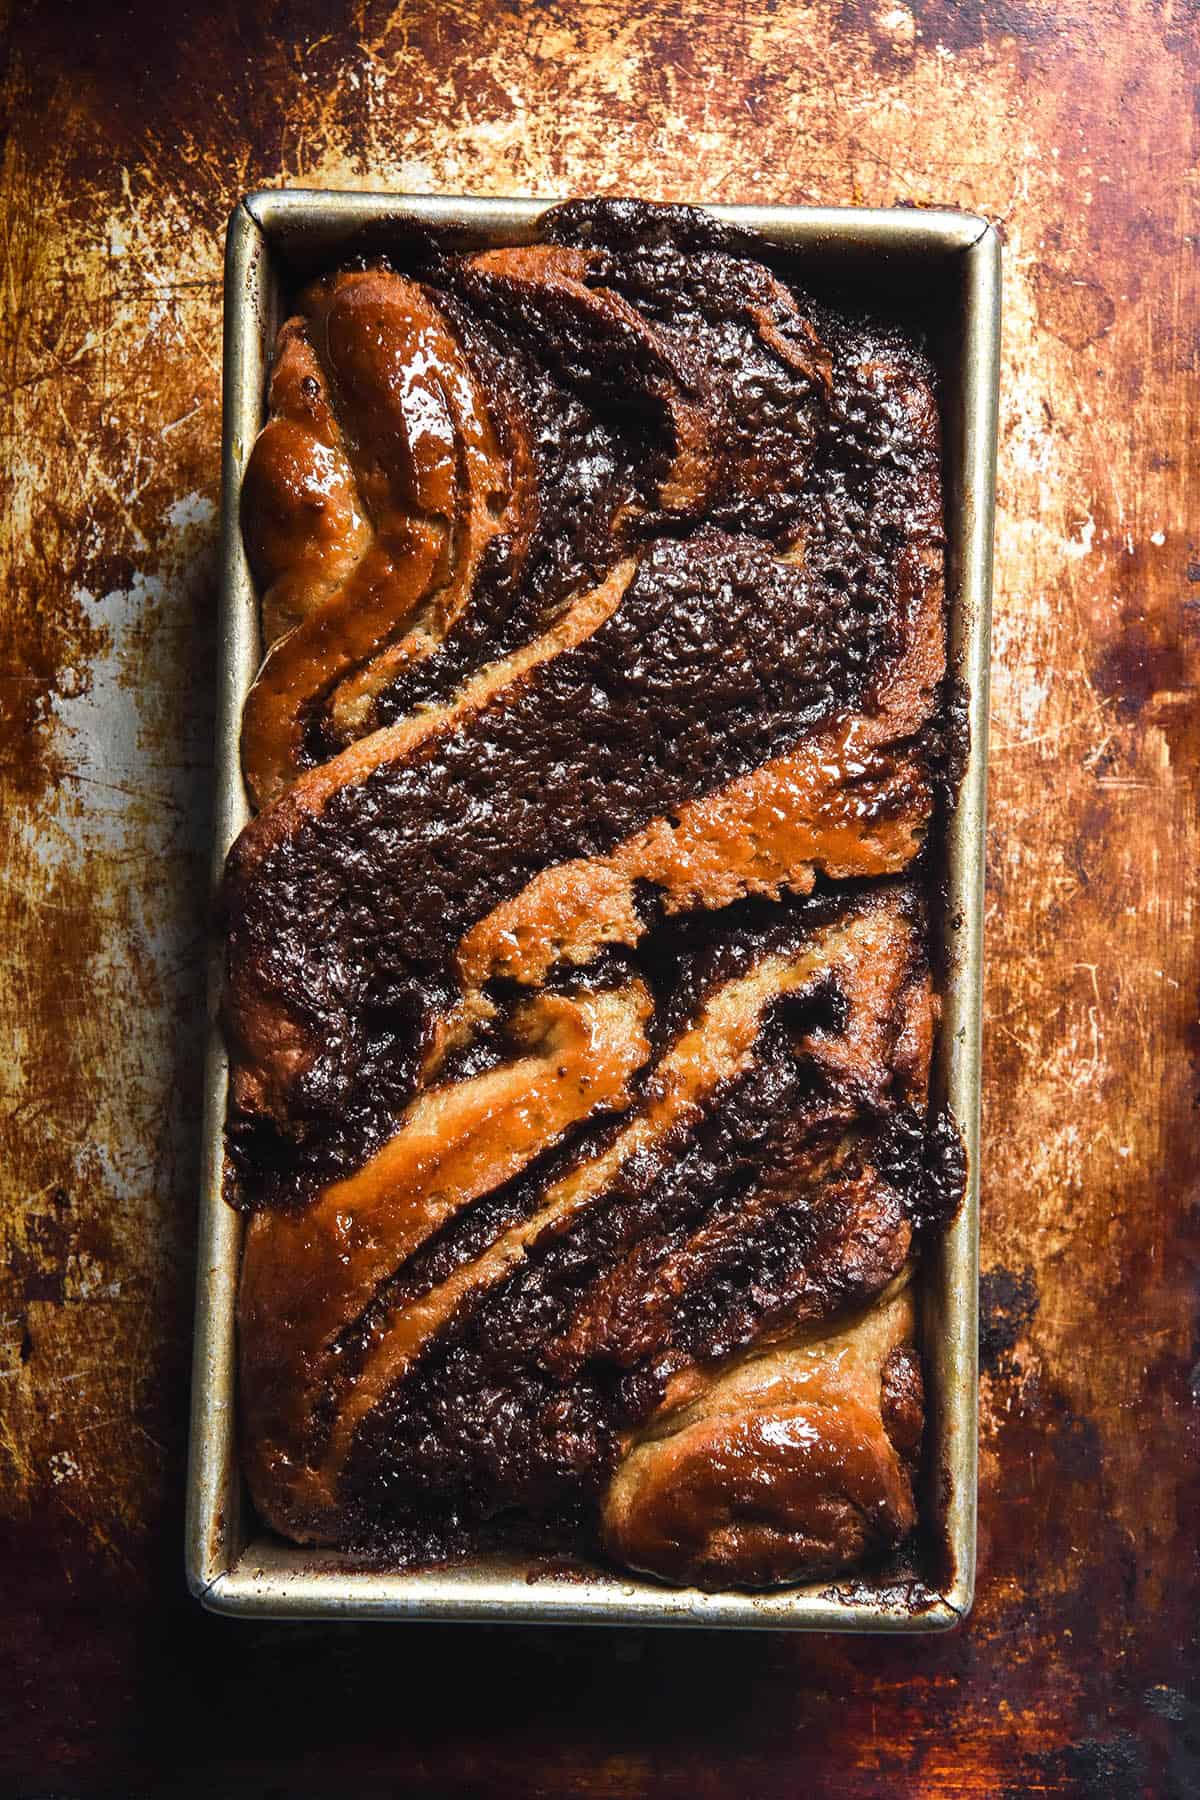 An aerial image of a buckwheat babka with chocolate swirls on a mottled brown baking tray.